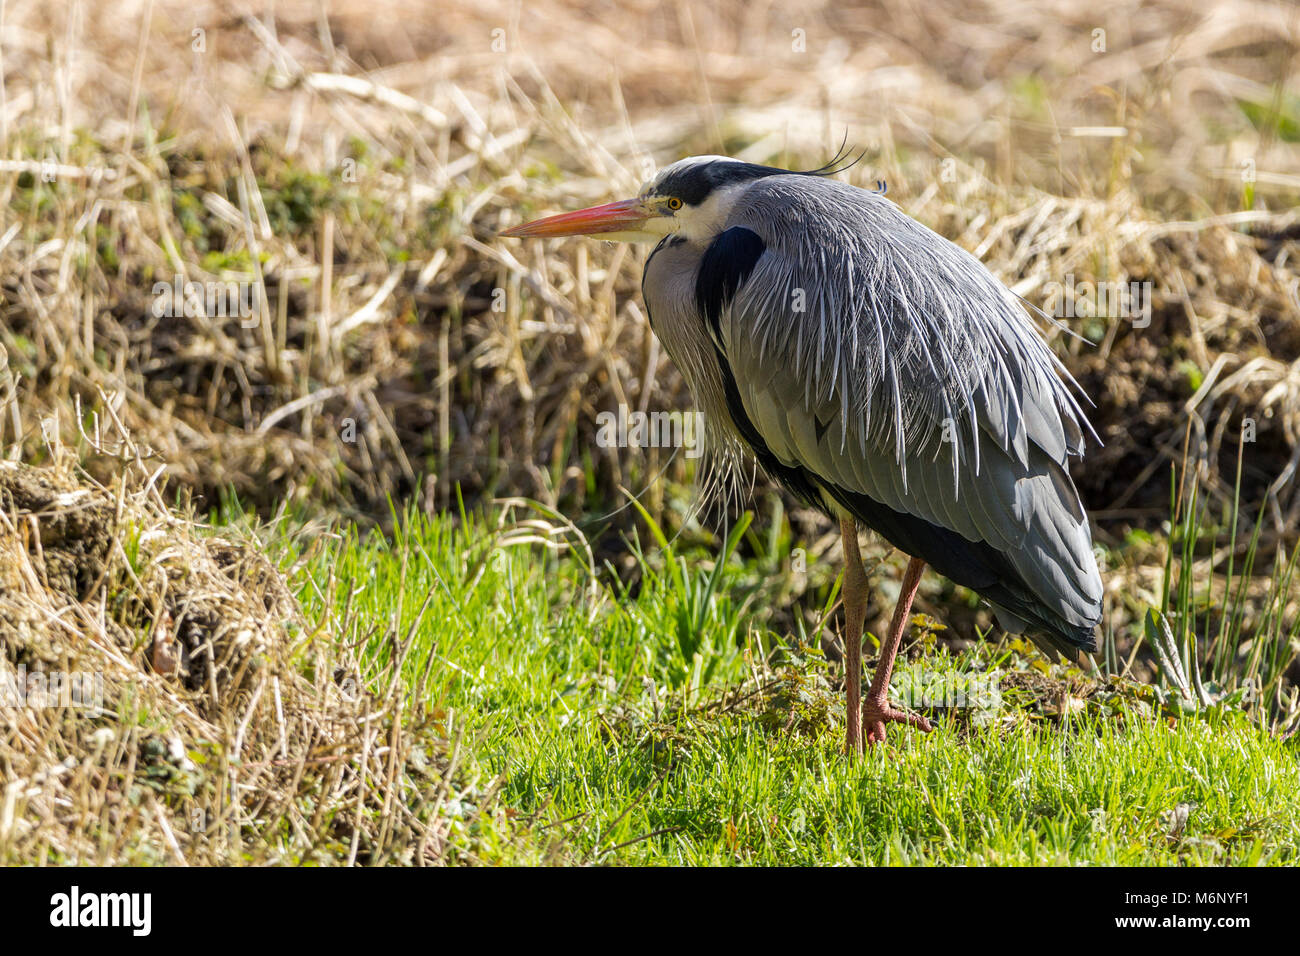 This Grey Heron (Ardea cinerea) was tucked round the corner of a small clearing looking a bit wary but not wanting to move even with frequent visitors Stock Photo